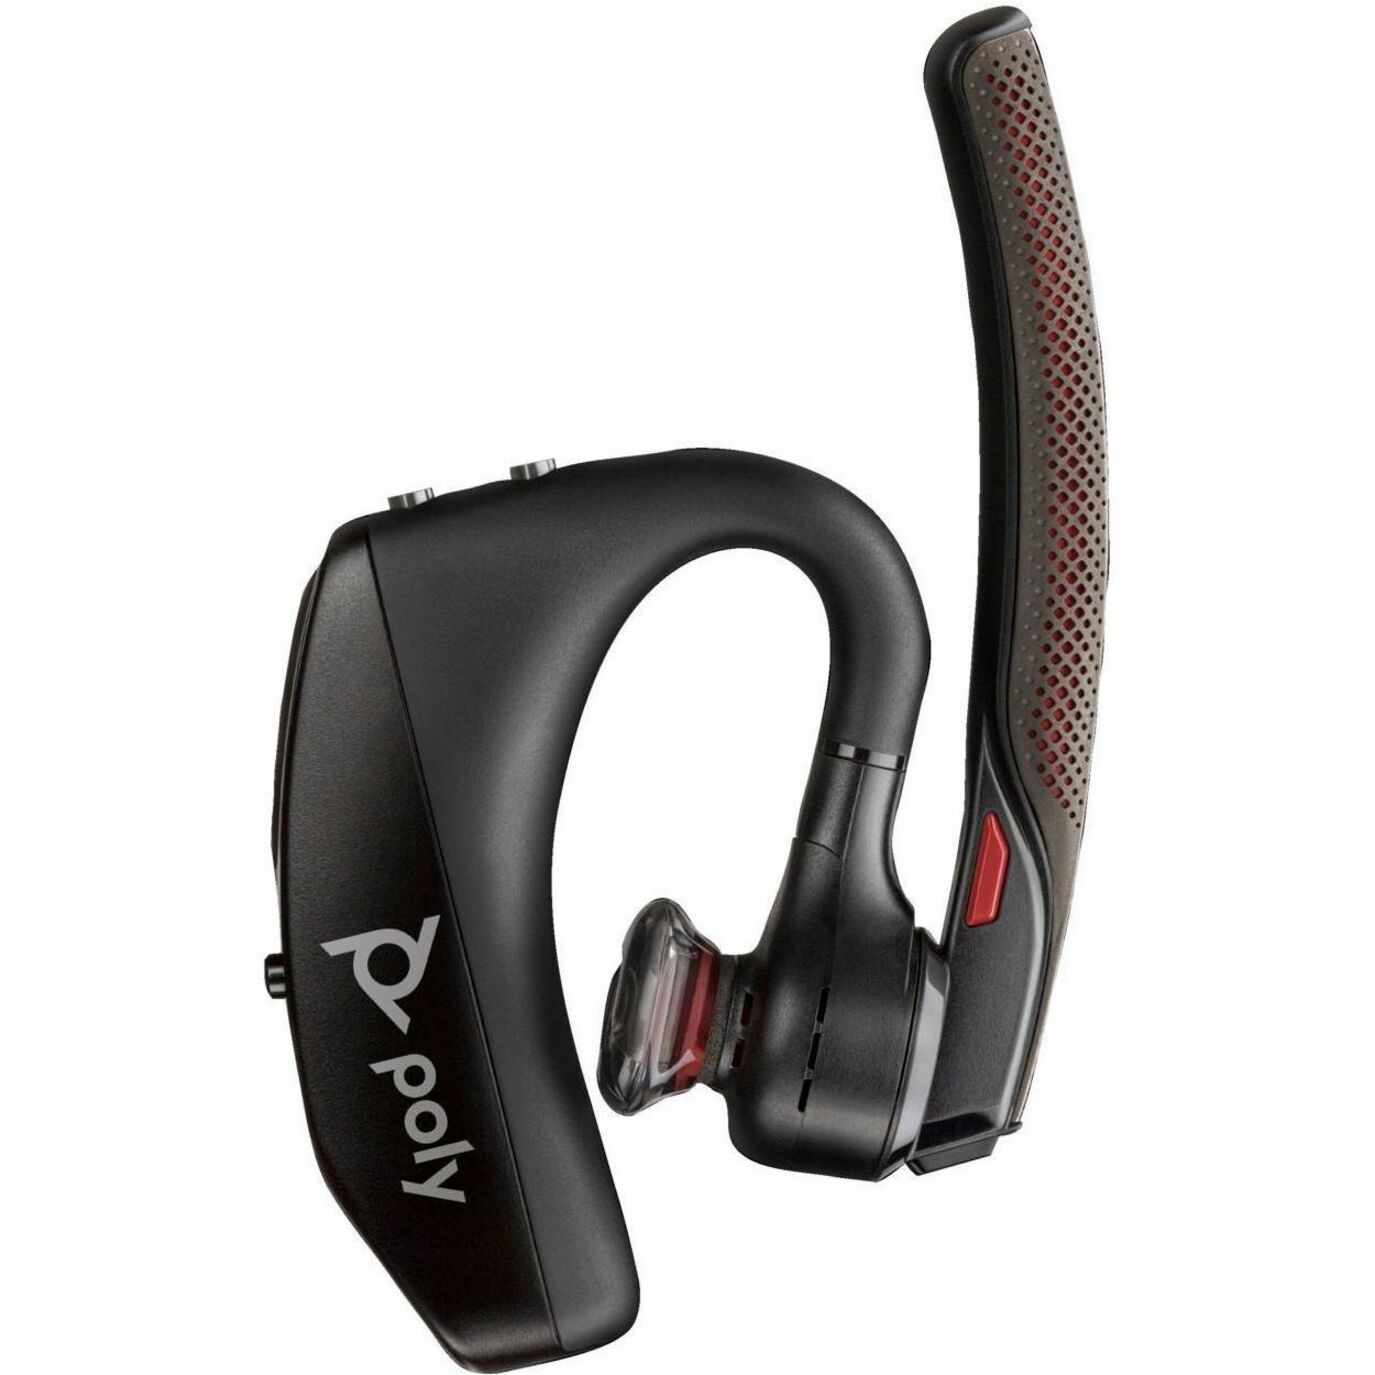 Poly 7K2F3AA Voyager 5200 UC USB-A Bluetooth Headset +BT700 Adapter, Noise Cancelling, Rechargeable Battery, Wideband Audio